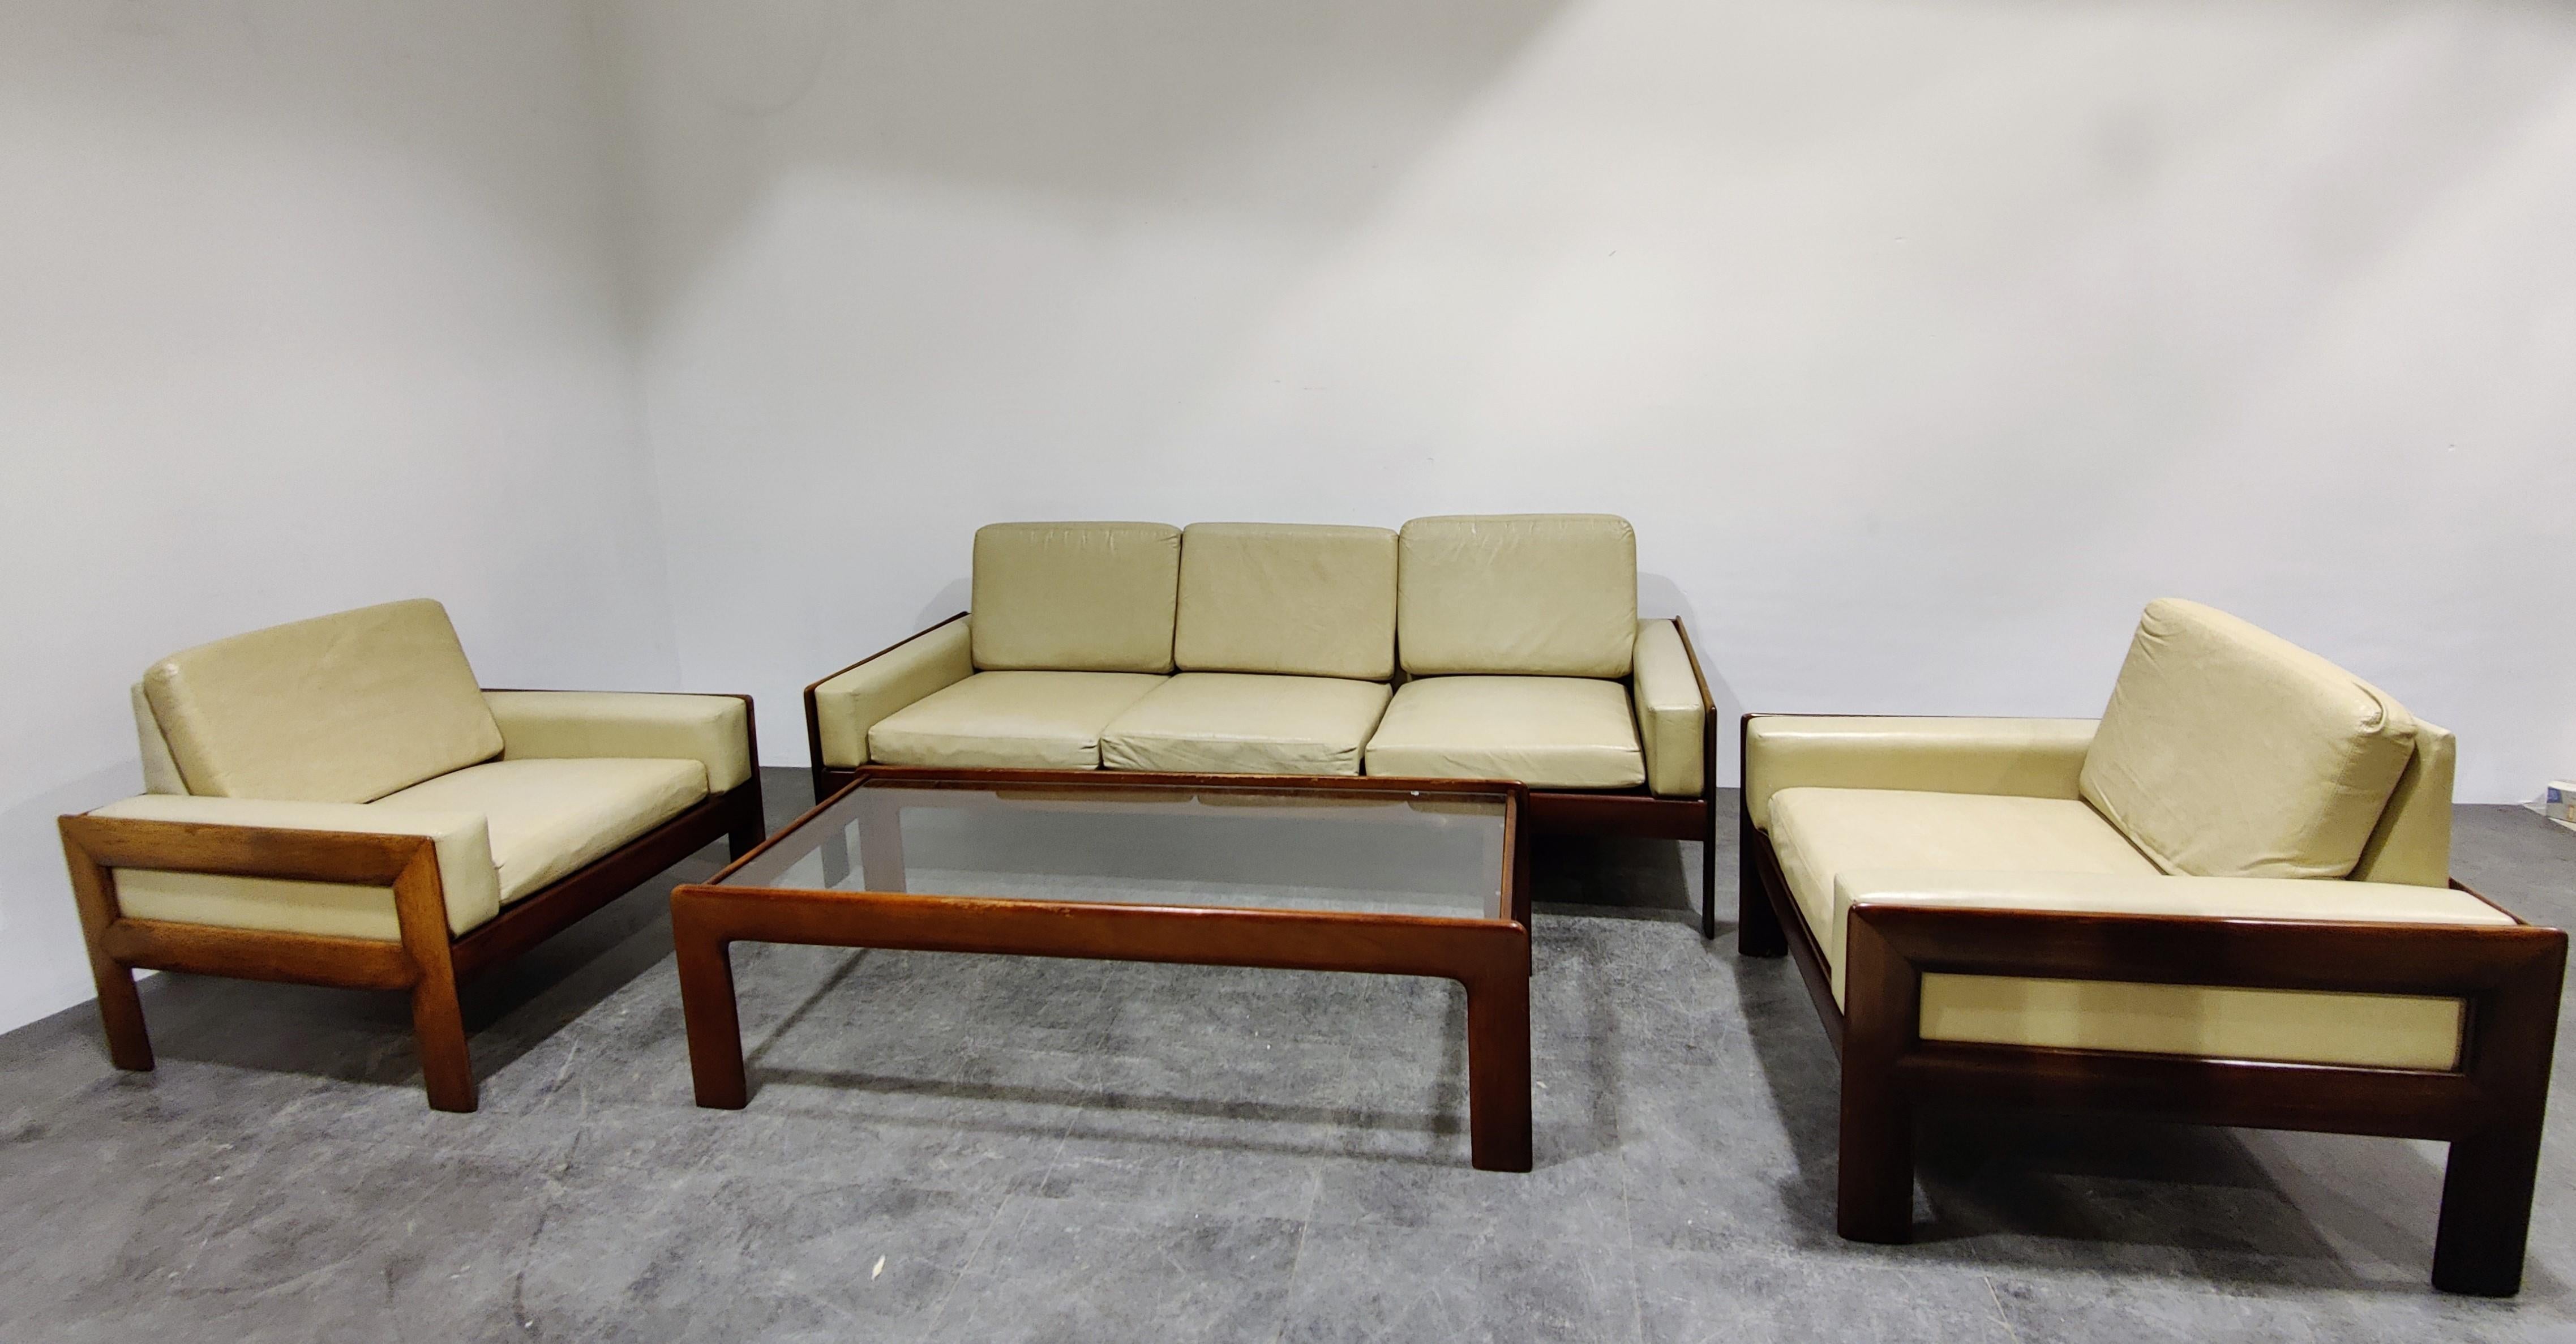 Midcentury living room set consisting of two armchairs, one three seater sofa and a coffee table.

Beautiful elegant and sleek design very much in the style of Tobia Scarpa's Bastiano sofa.

They come with the original off white faux leather